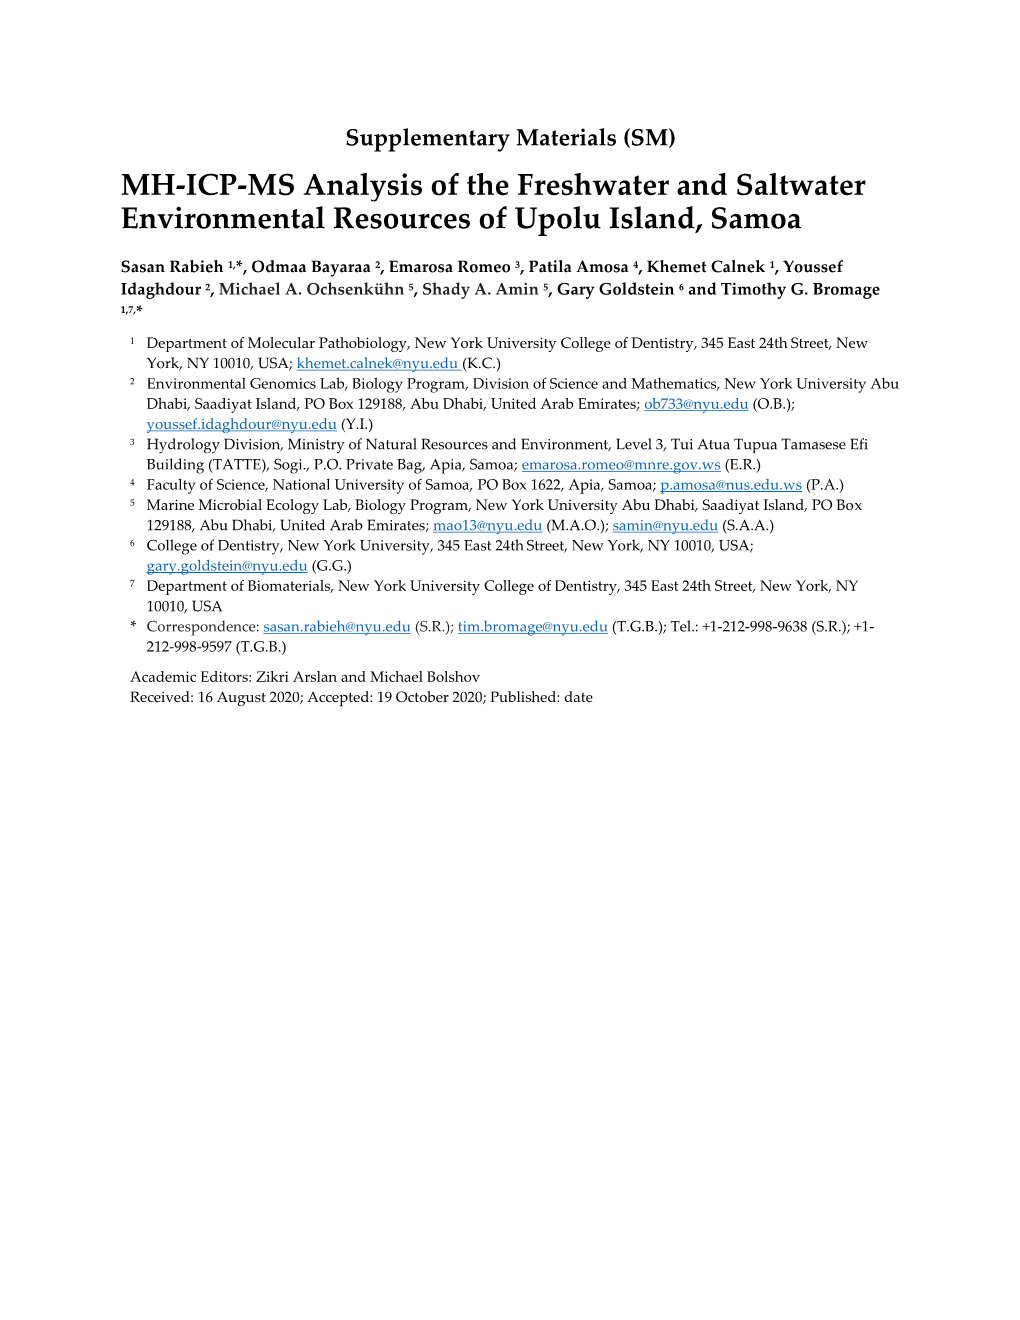 MH-ICP-MS Analysis of the Freshwater and Saltwater Environmental Resources of Upolu Island, Samoa